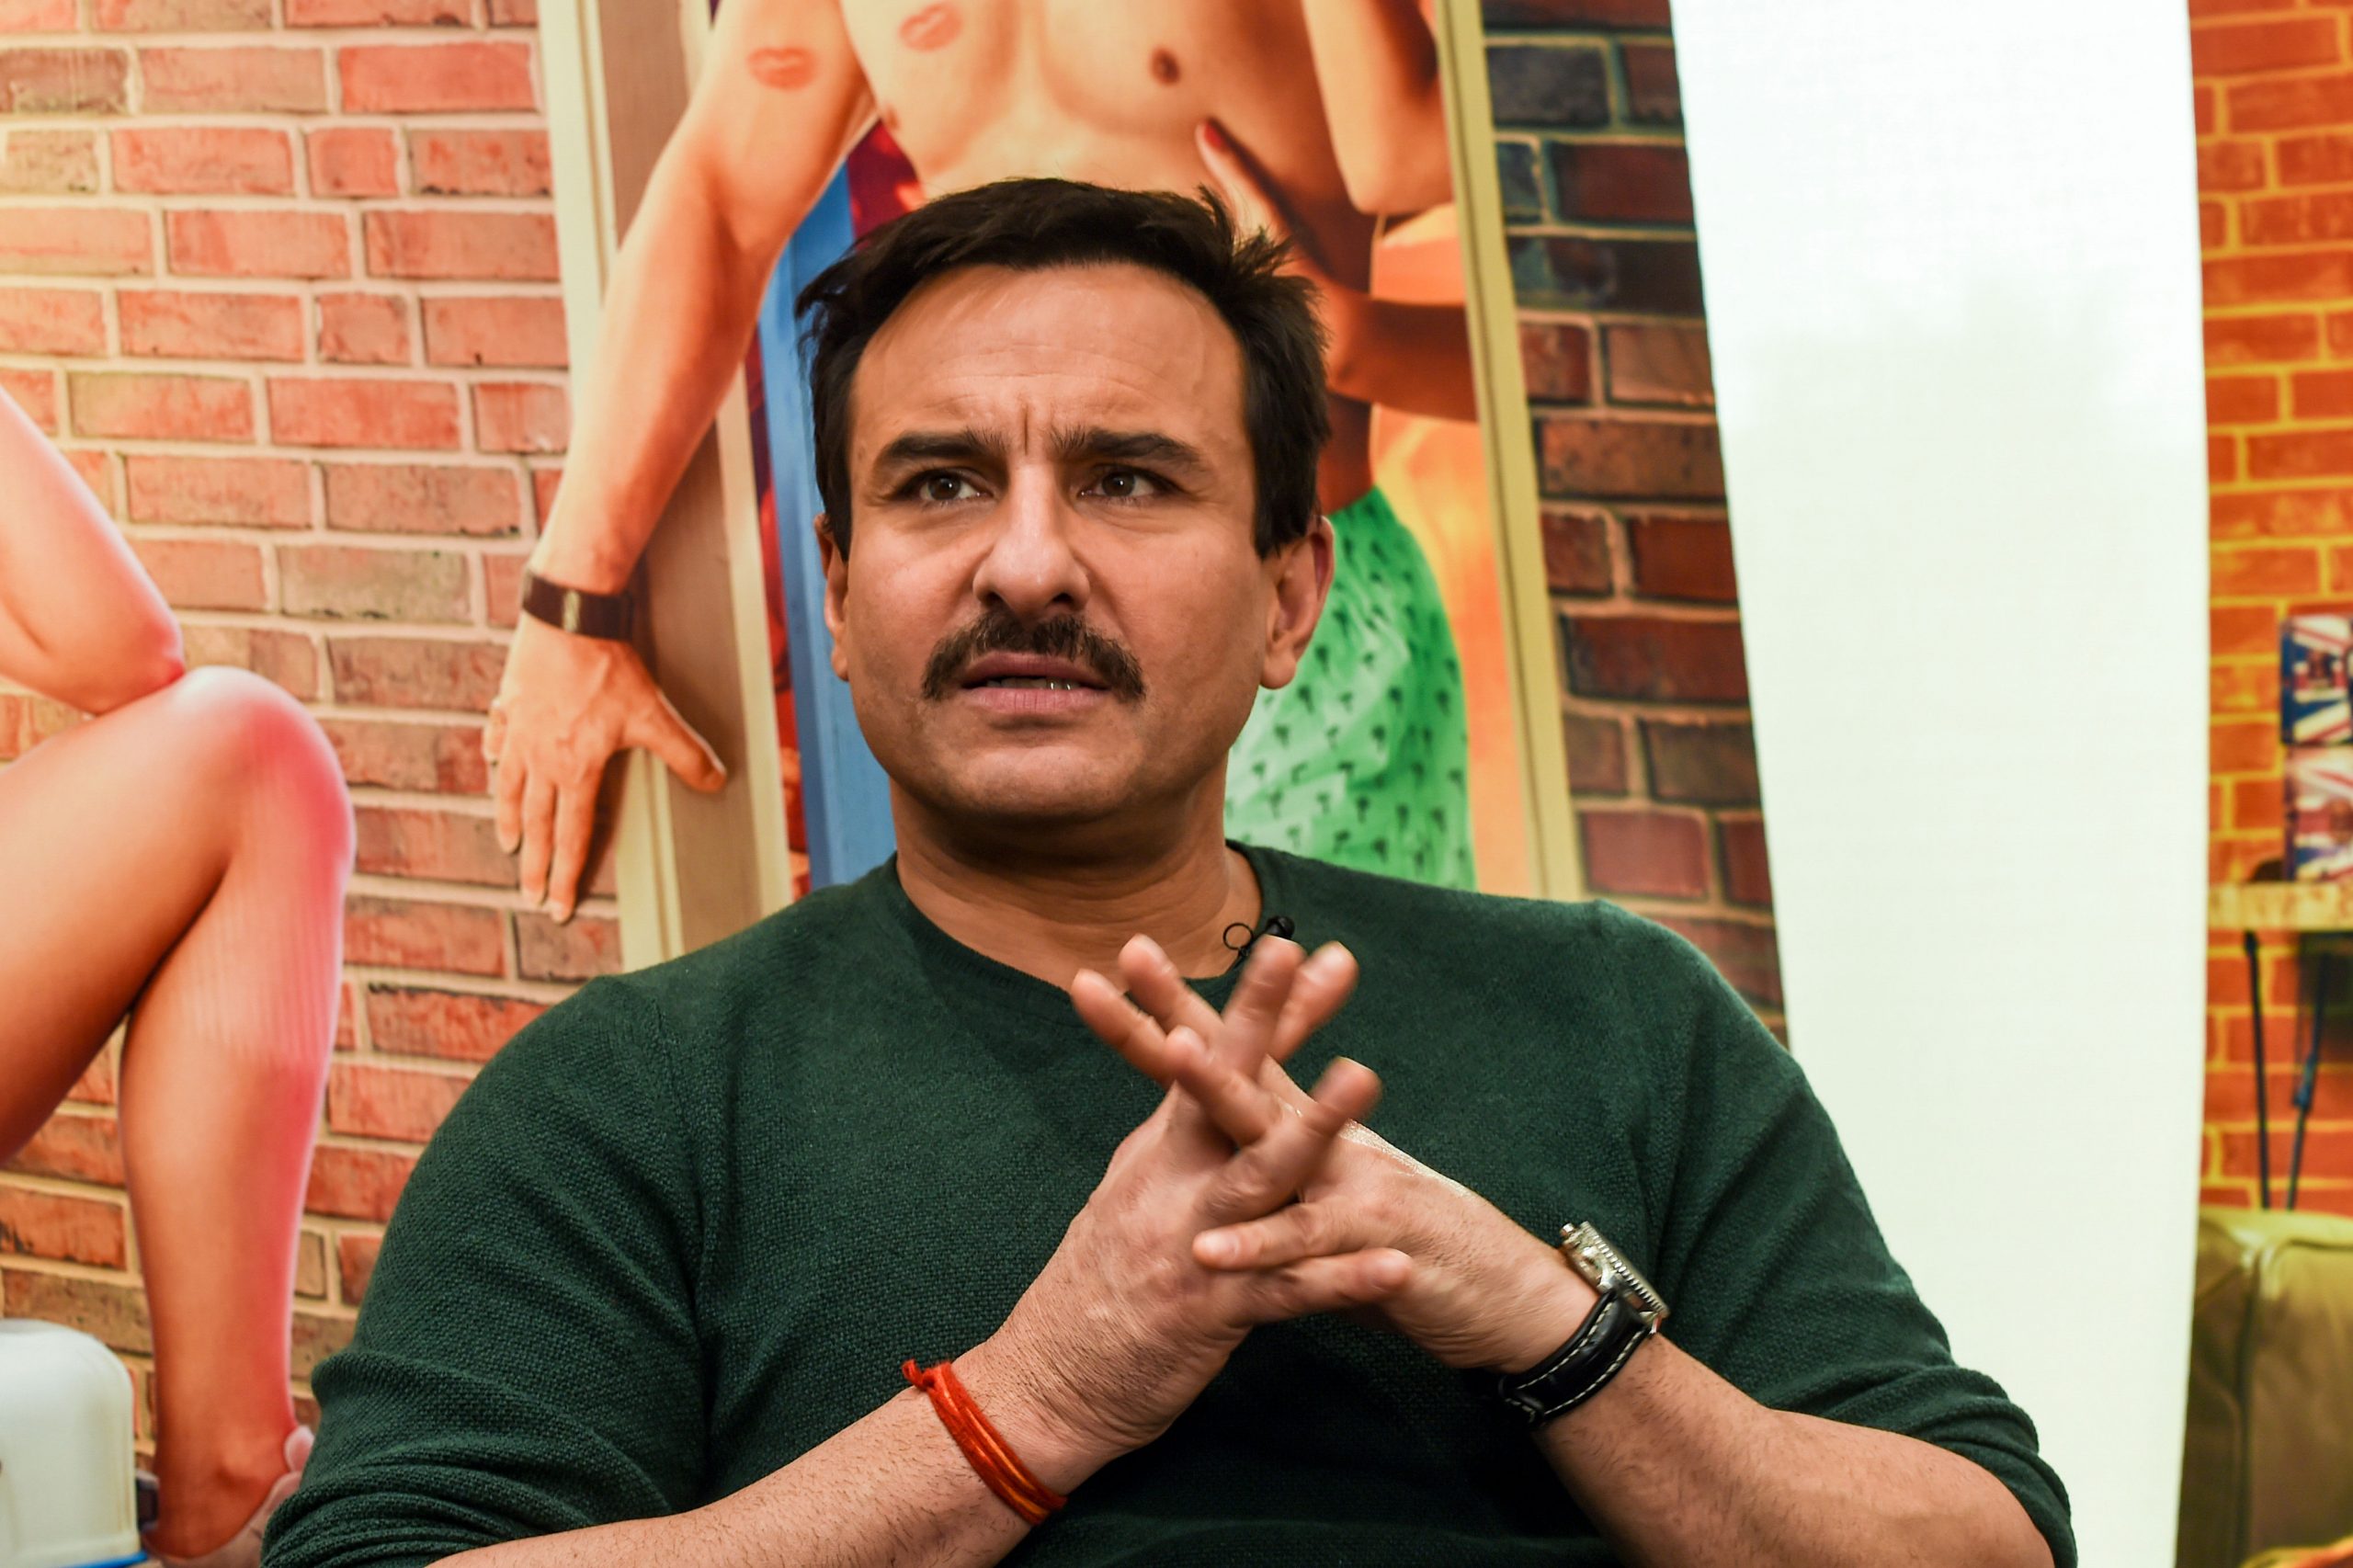 Saif Ali Khan issues apology for saying ‘Adipurush’ will ‘justify abduction of Sita’